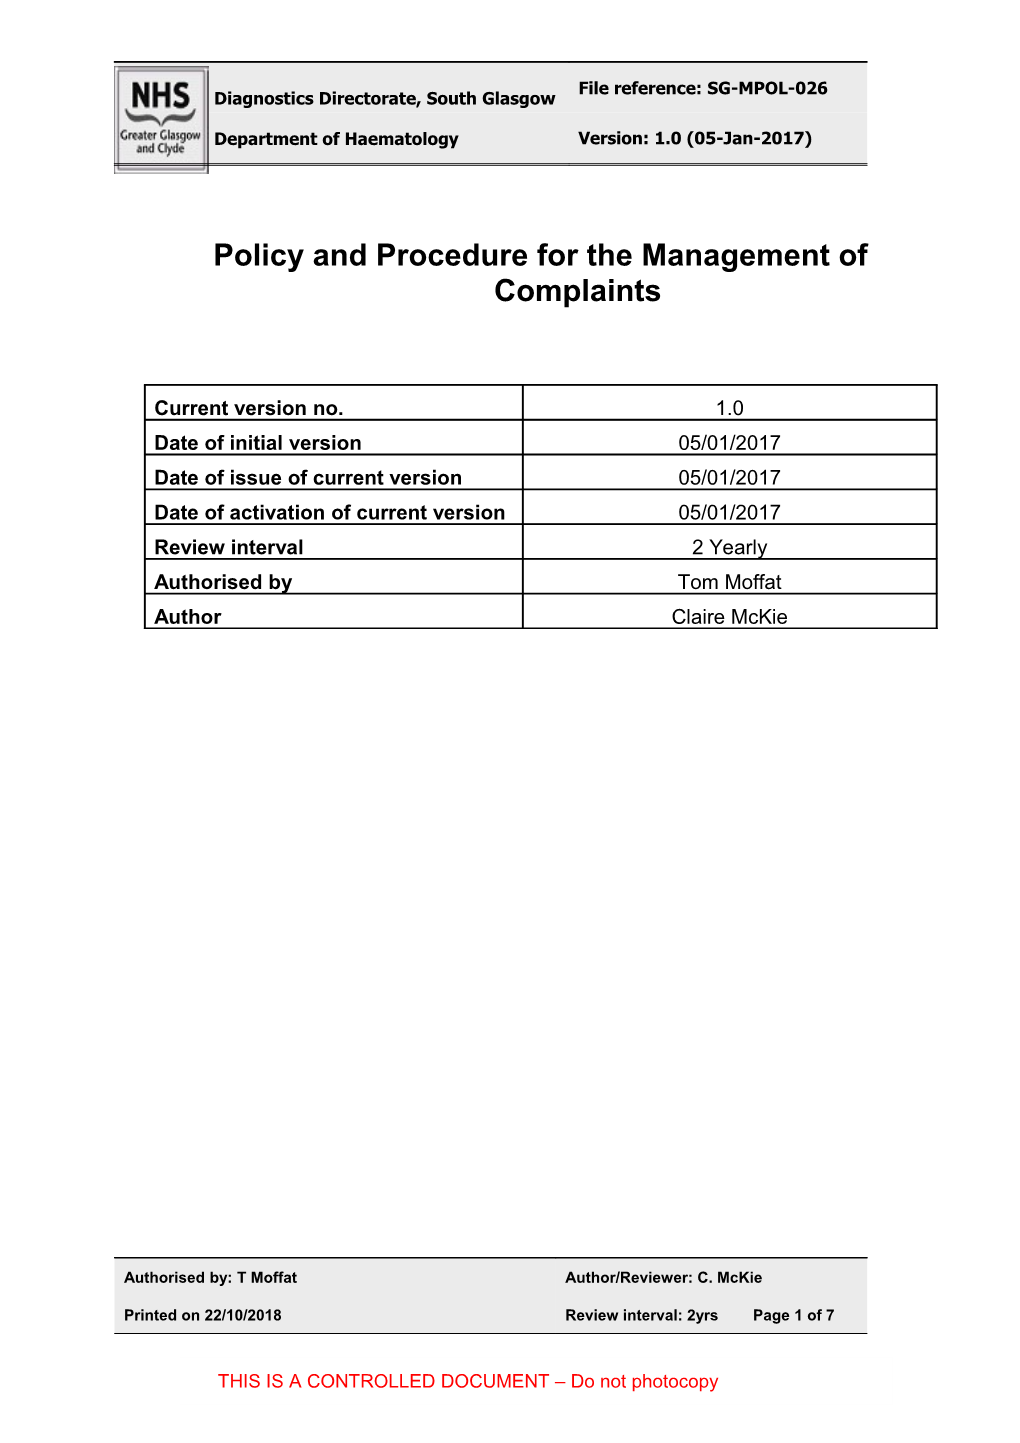 Policy and Procedure for the Management of Complaints